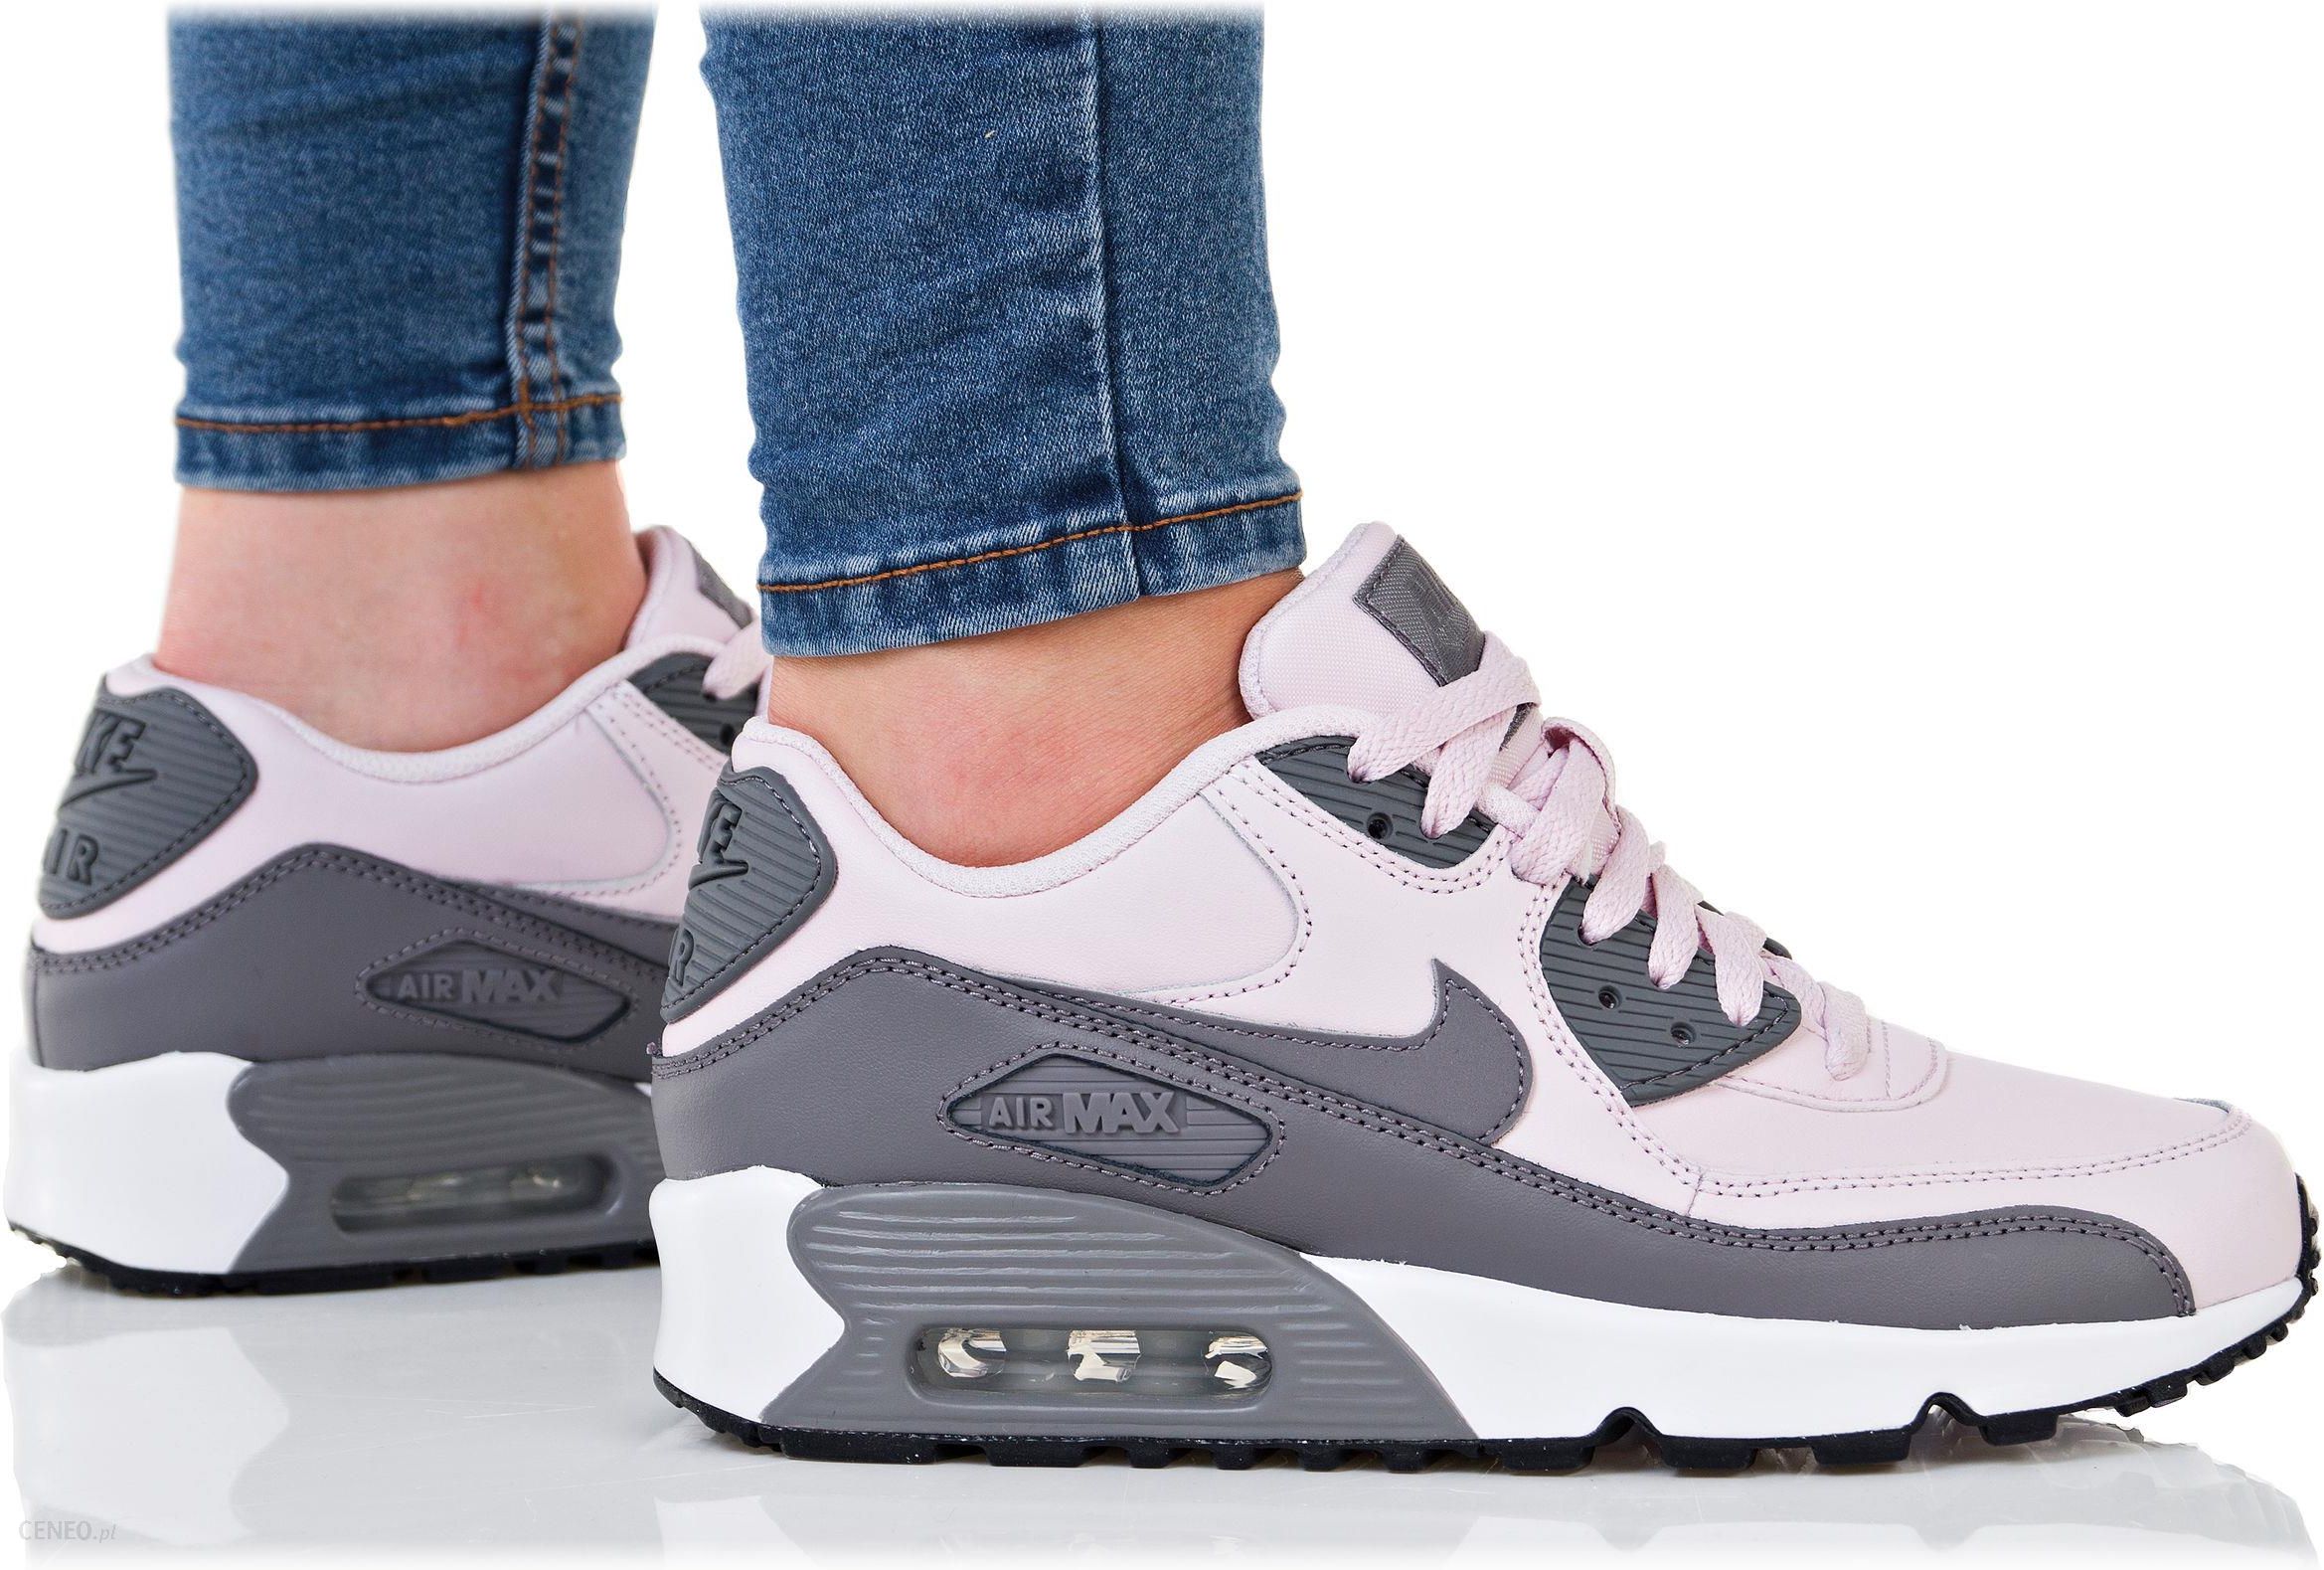 studio Wetenschap attent Buty Nike Damskie Air Max 90 Ltr Gs 833376-601 - Ceny i opinie - Ceneo.pl